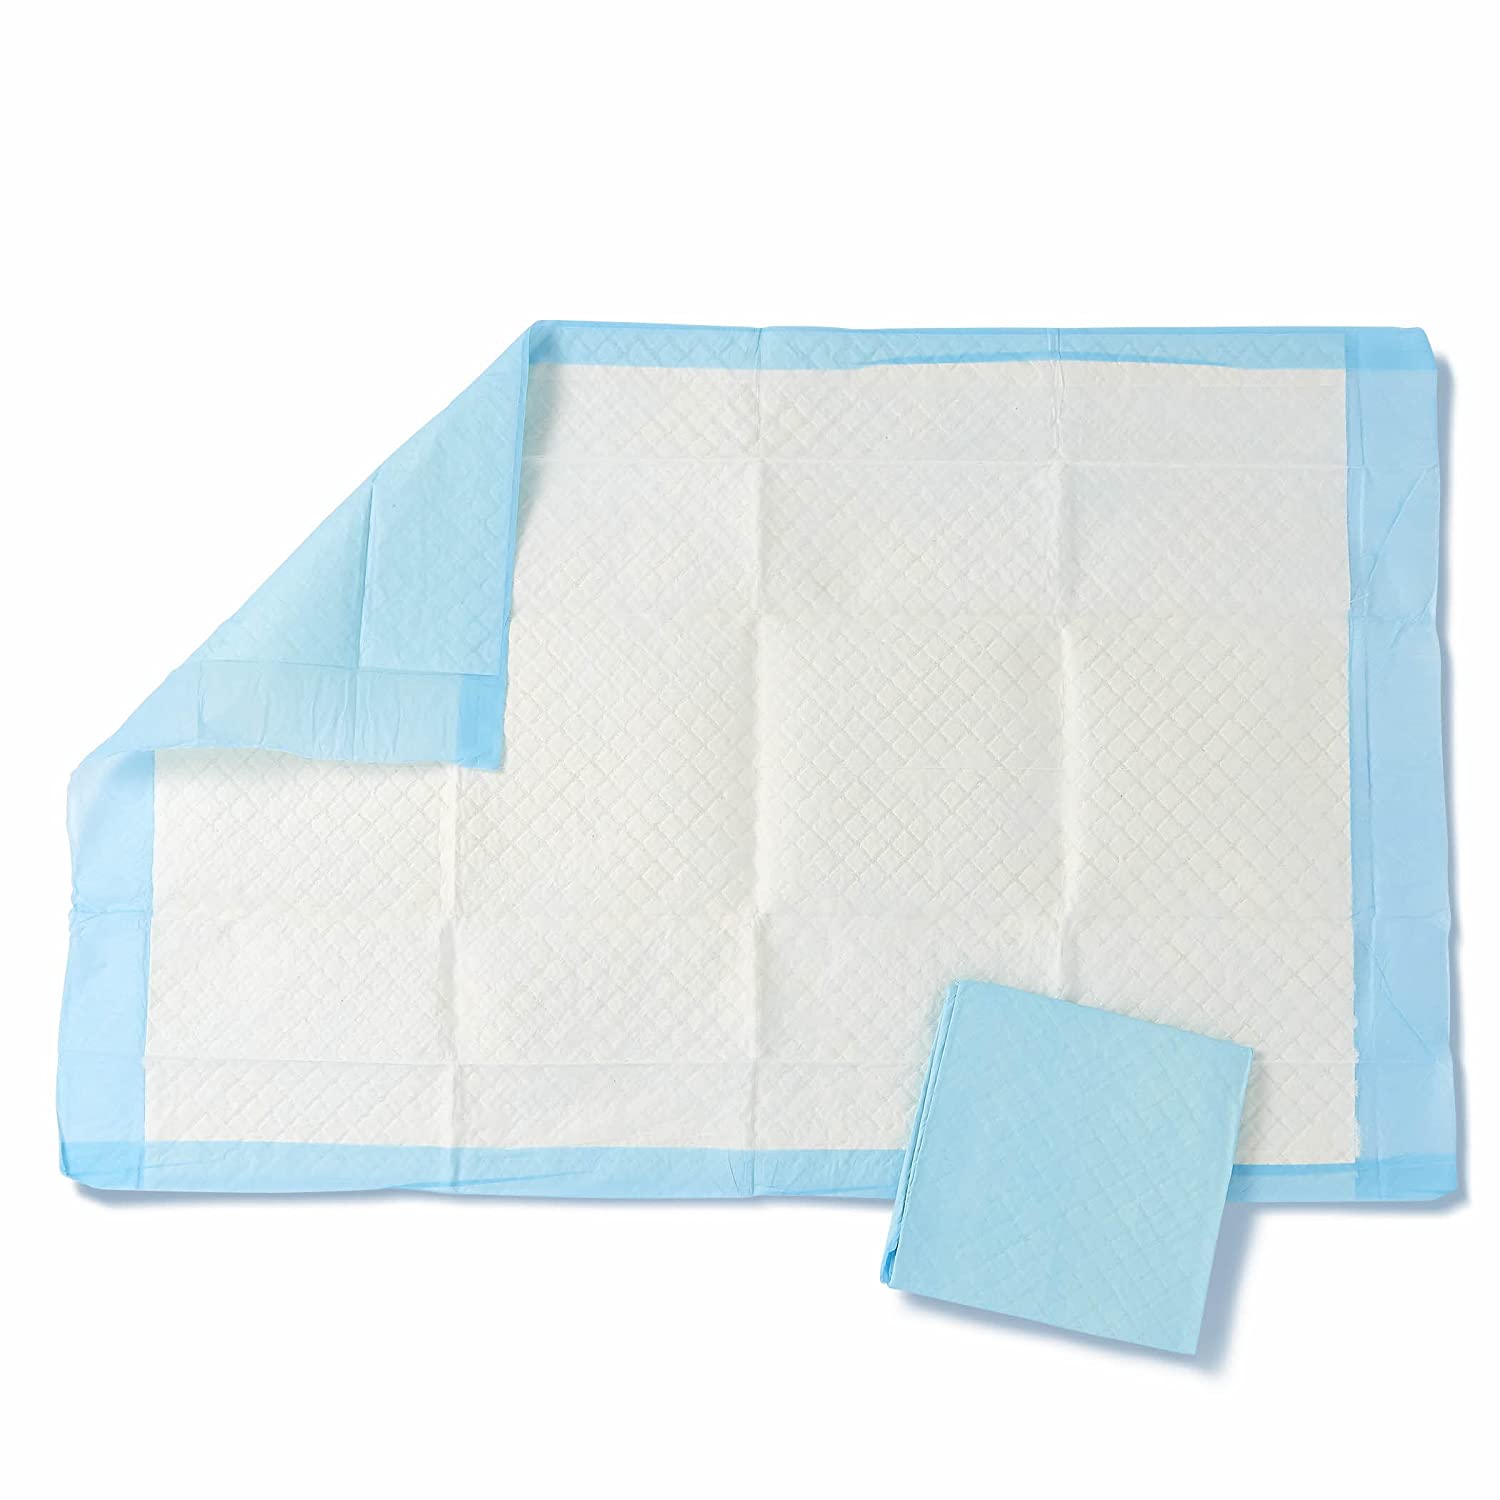 Waterproof Incontinence Bed Pads Disposable Underpad Absorbent Protection for Kids, Adults, Elderly, Puppy